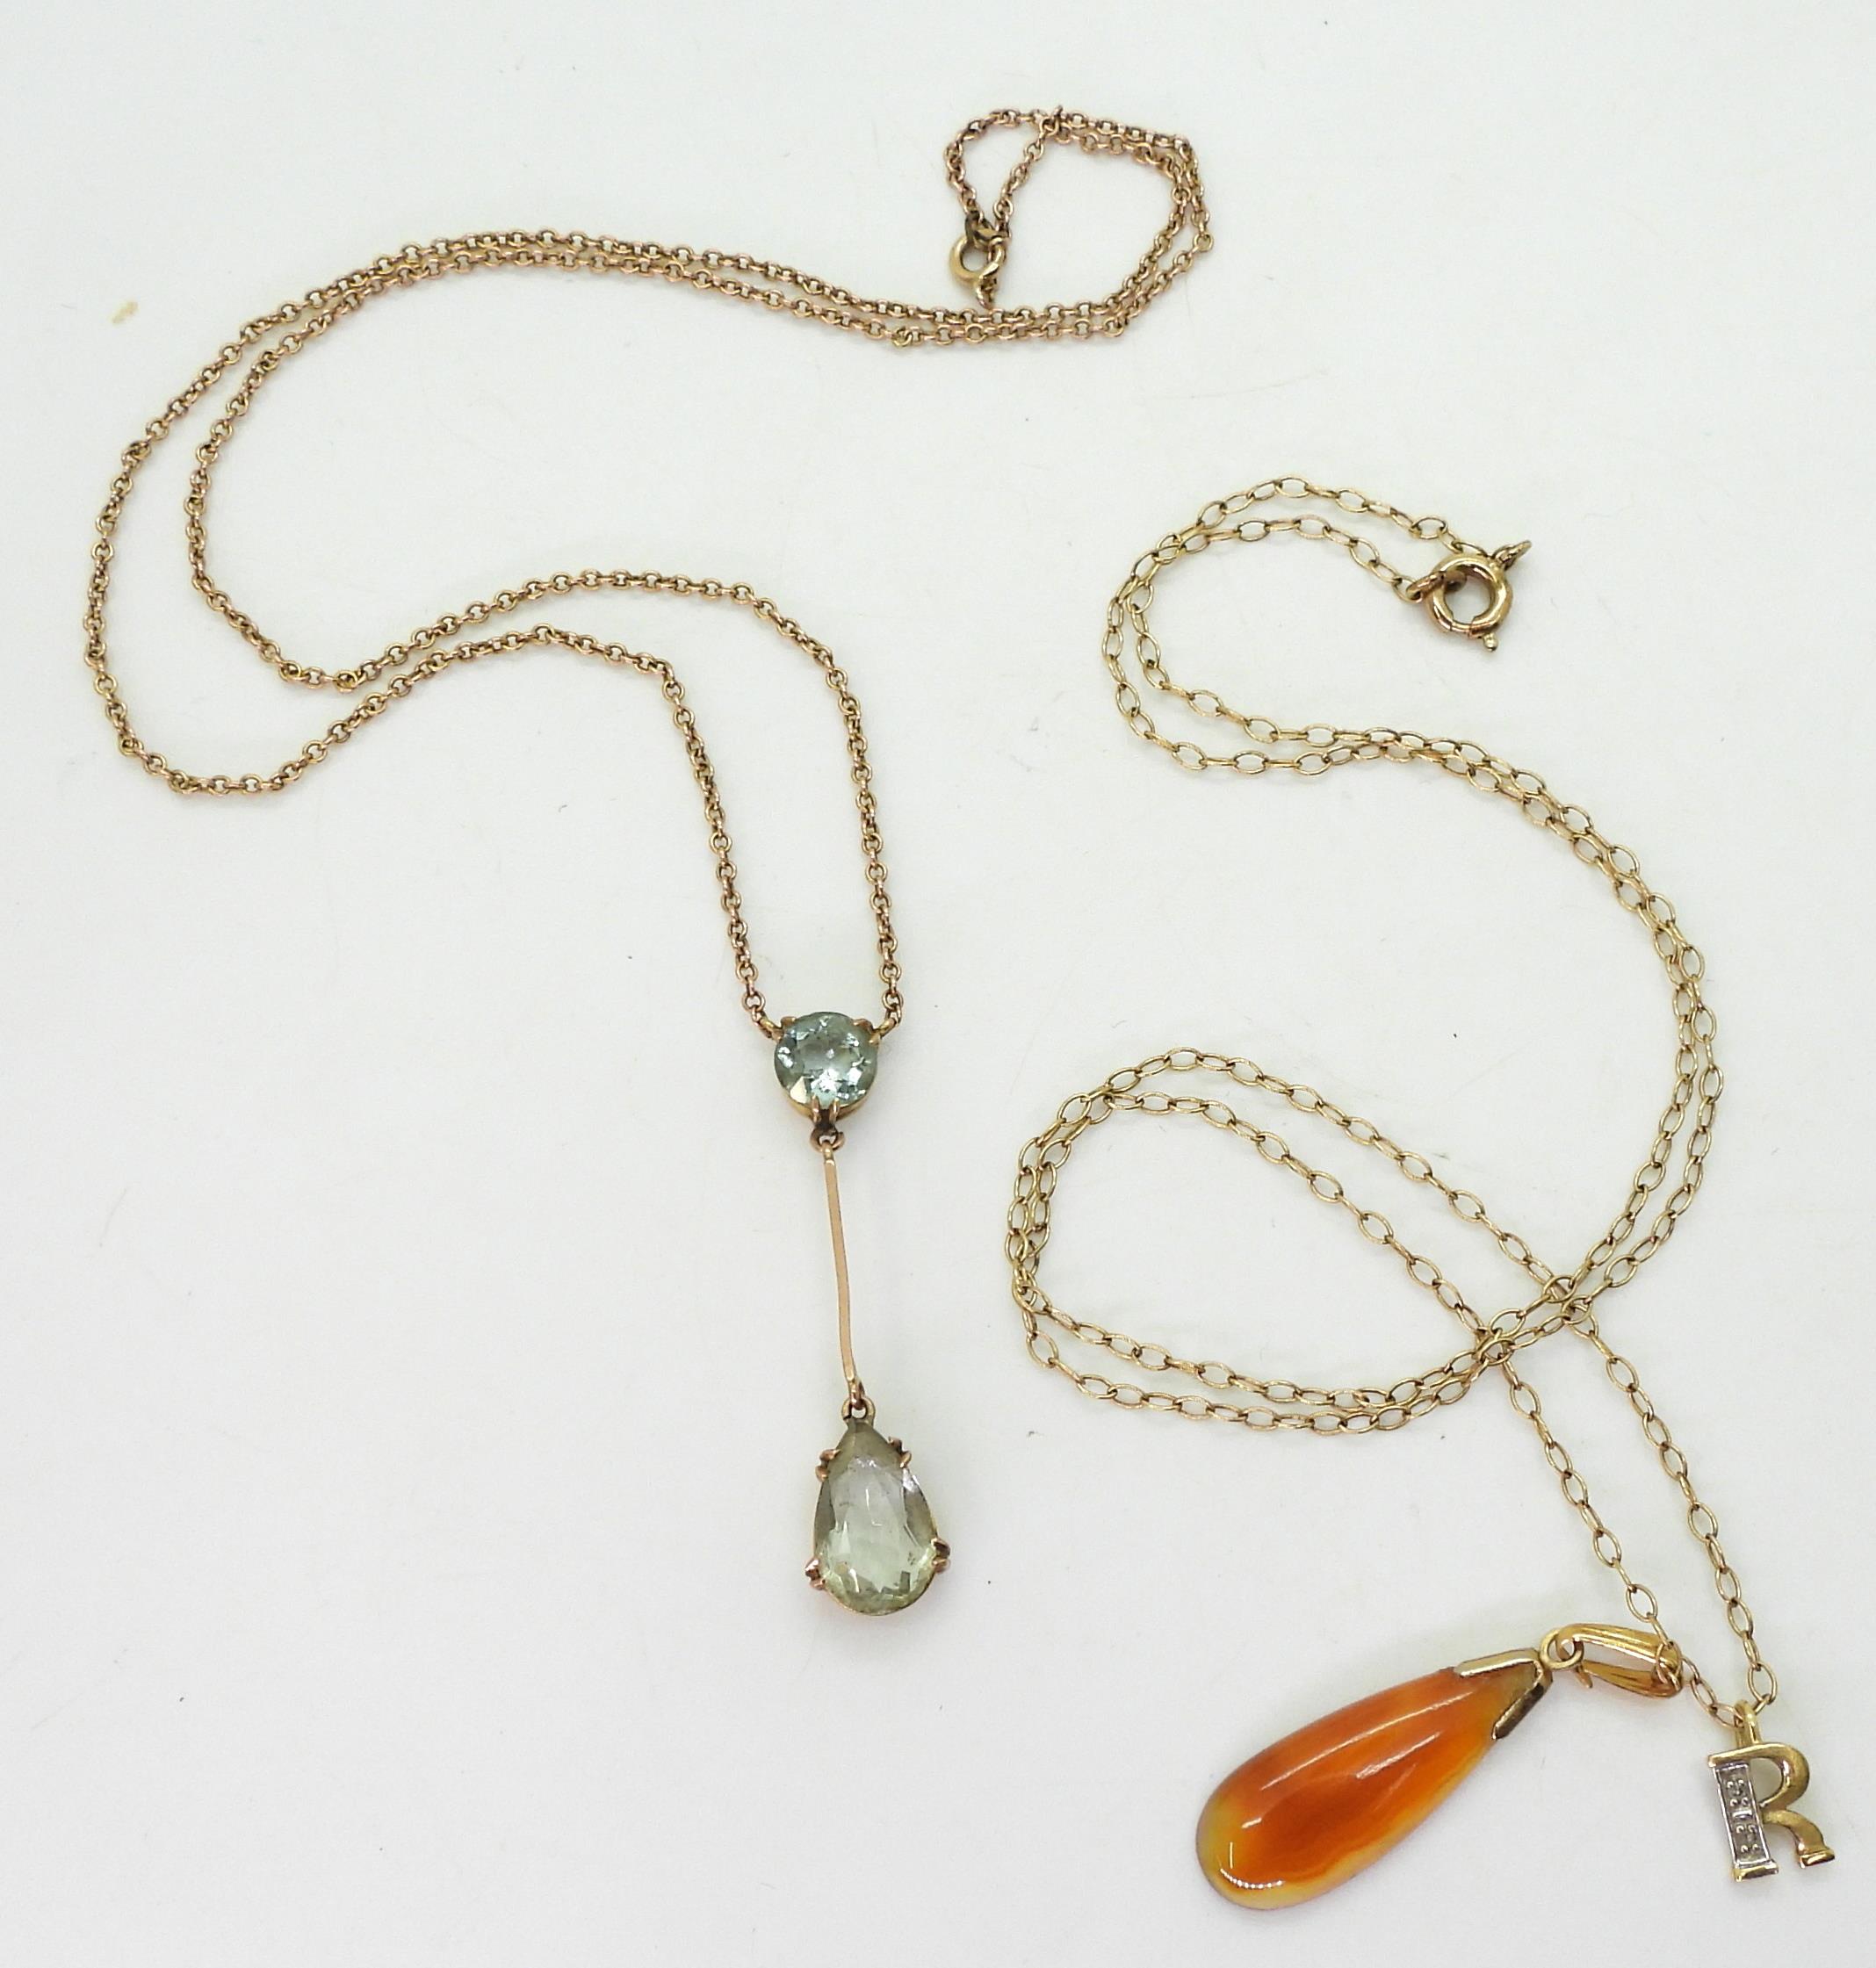 An 18ct and diamond 'R' pendant, weight 0.5gms,  9ct gold aquamarine pendant necklace, and a 9ct - Image 2 of 3